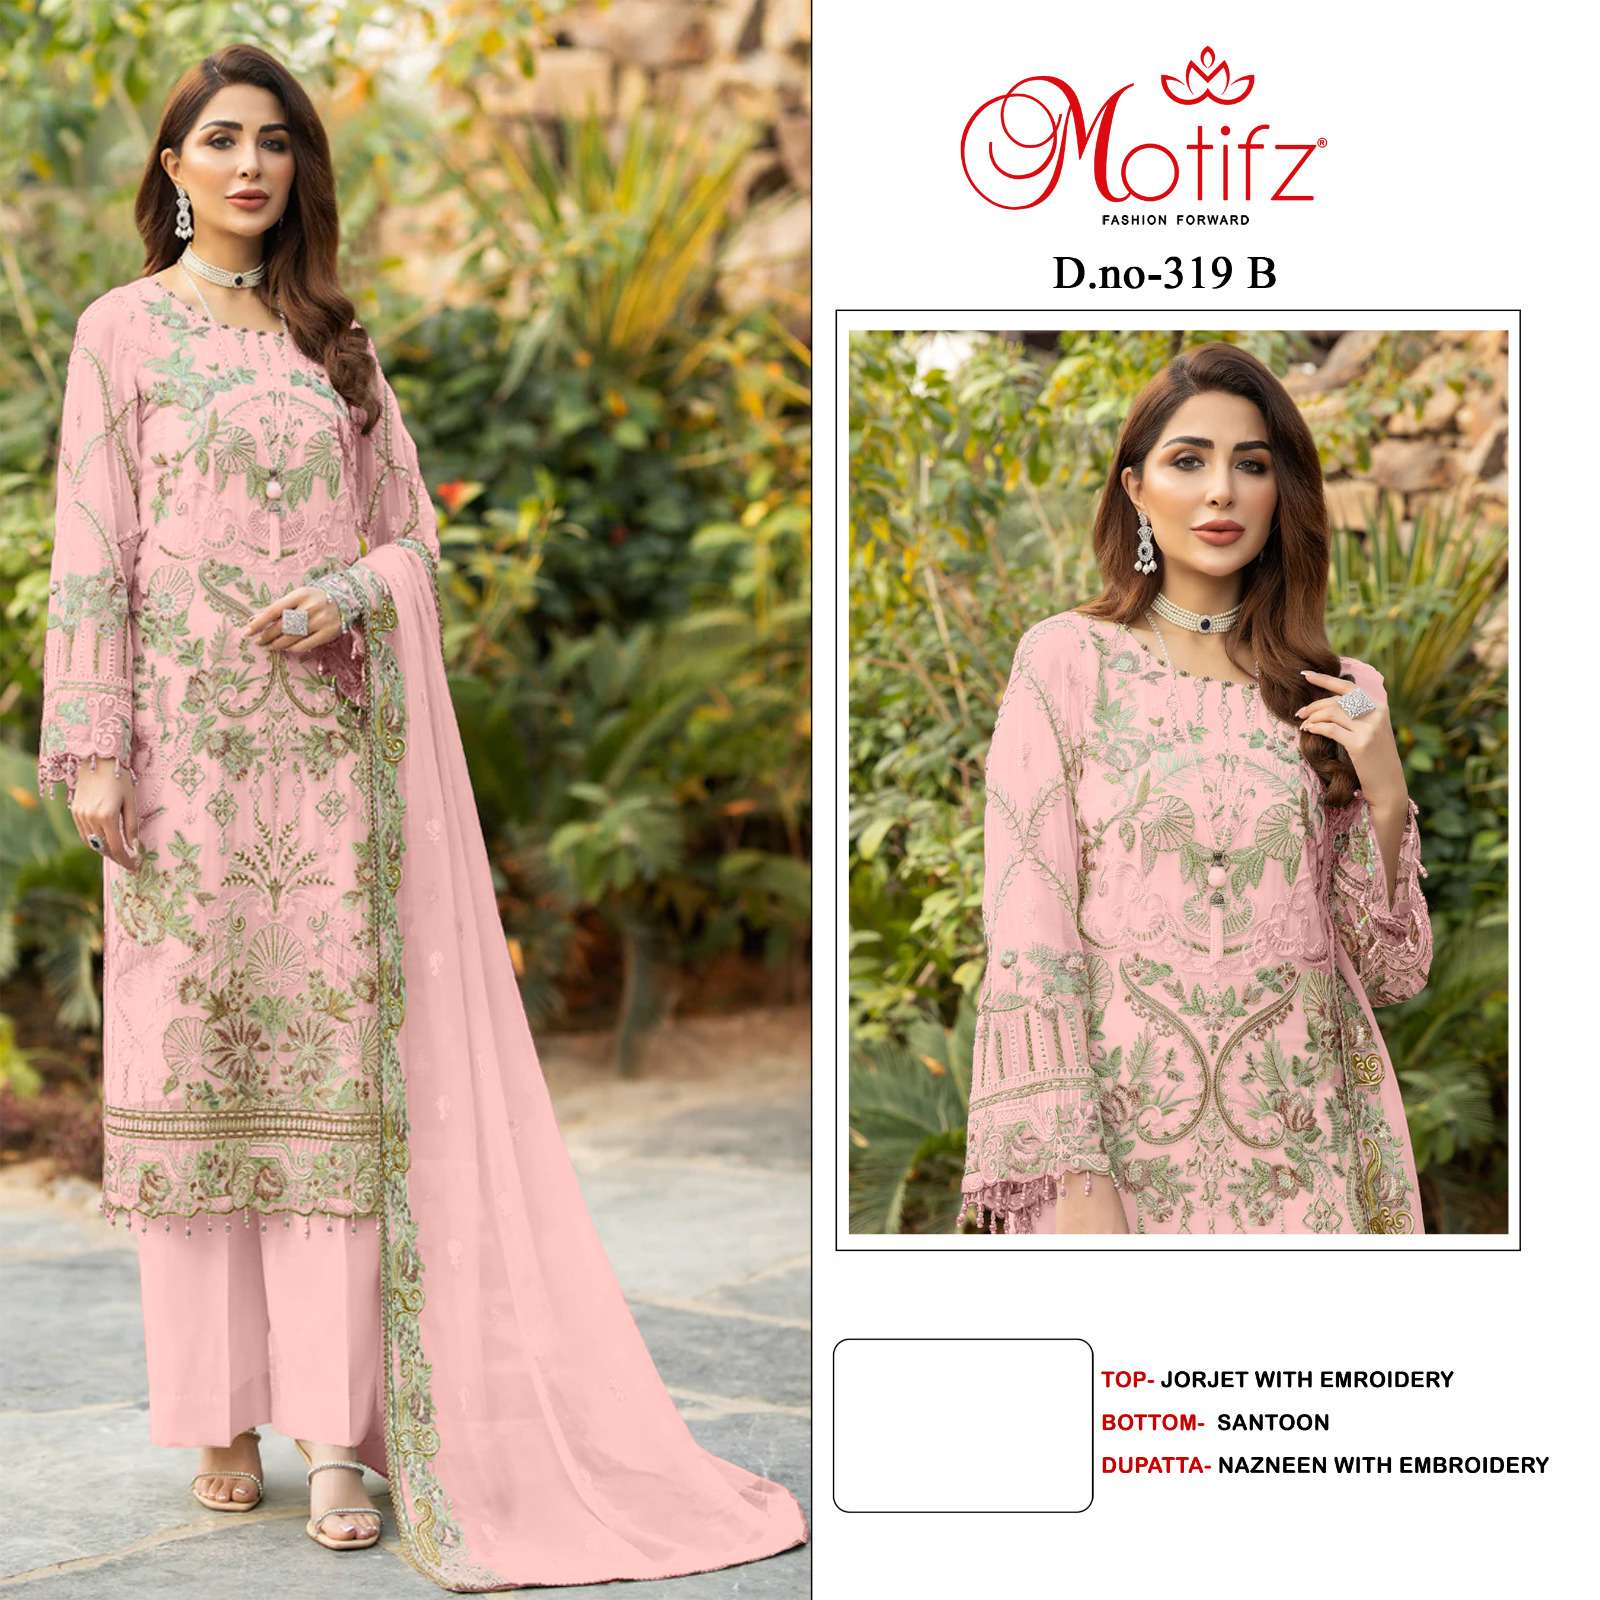 Motifz Hit Design 319 Colours By Motifz 319-B To 319-D Series Beautiful Pakistani Suits Colorful Stylish Fancy Casual Wear & Ethnic Wear Georgette Embroidered Dresses At Wholesale Price